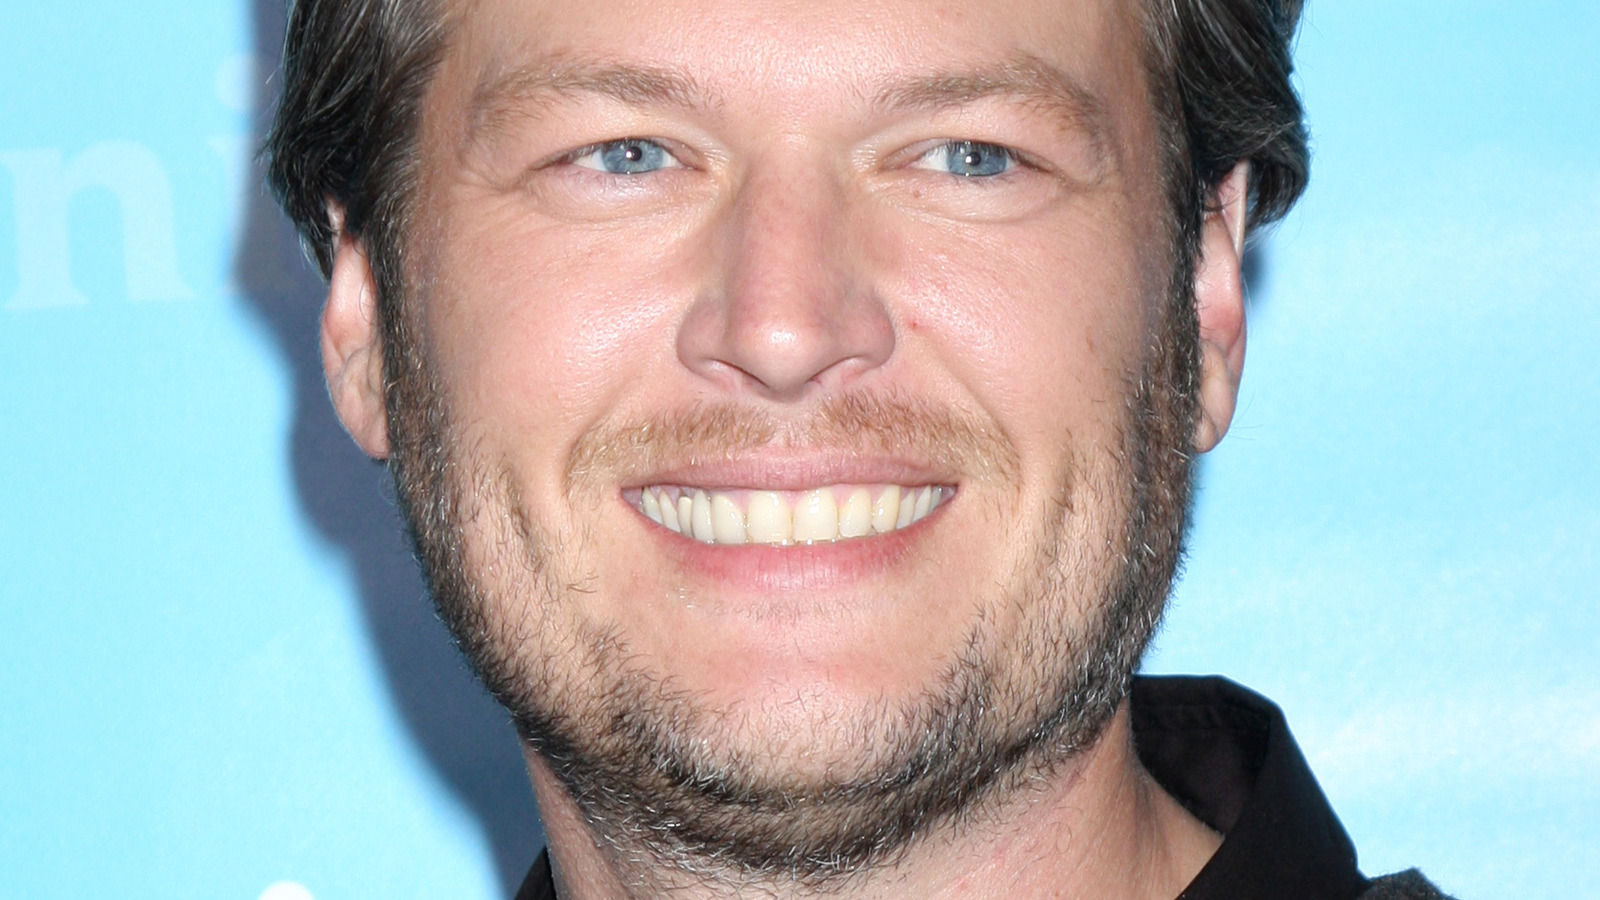 The Truth About Blake Shelton's Parents